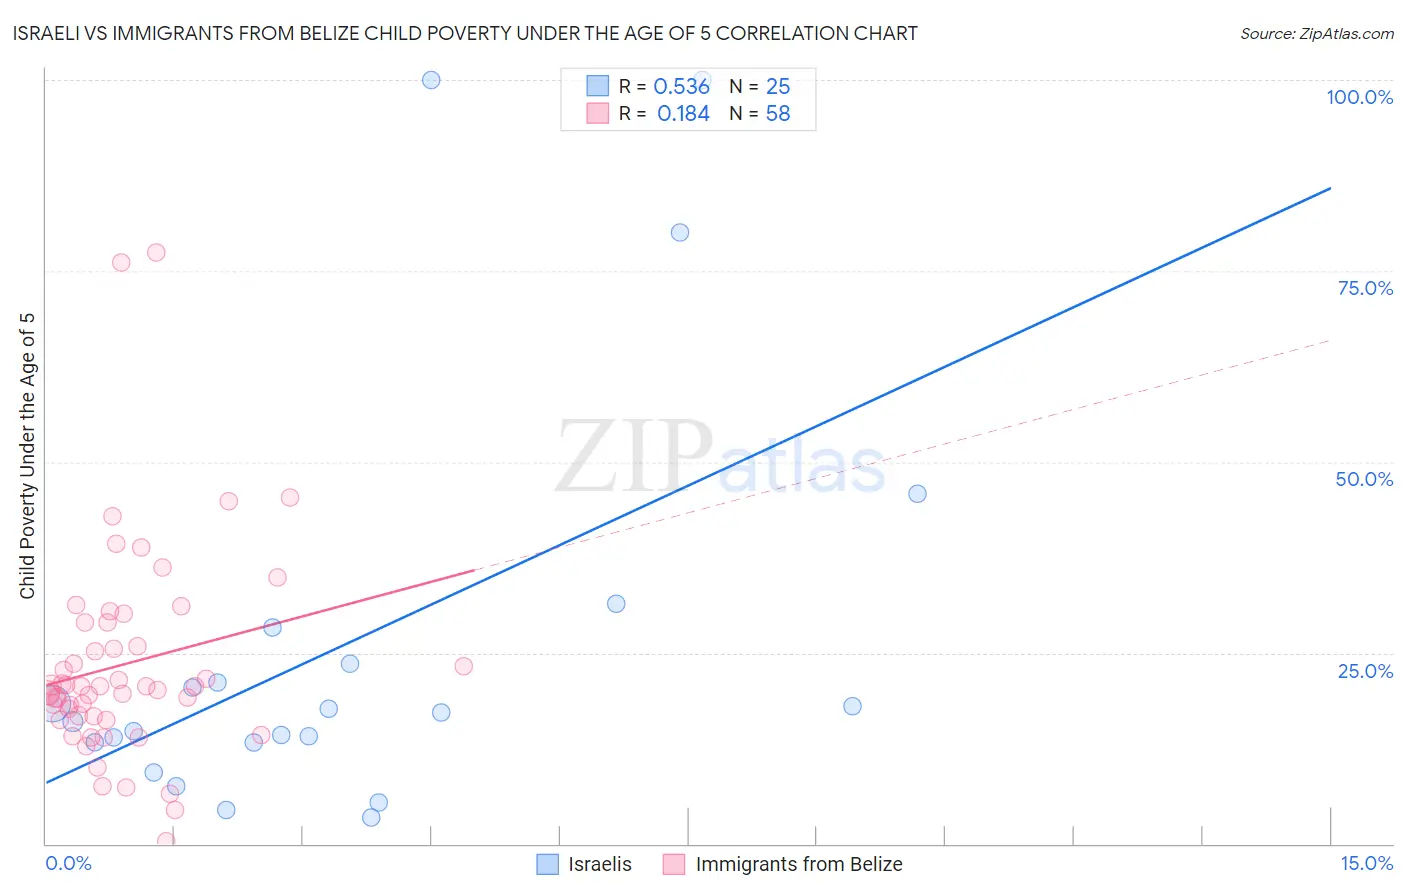 Israeli vs Immigrants from Belize Child Poverty Under the Age of 5